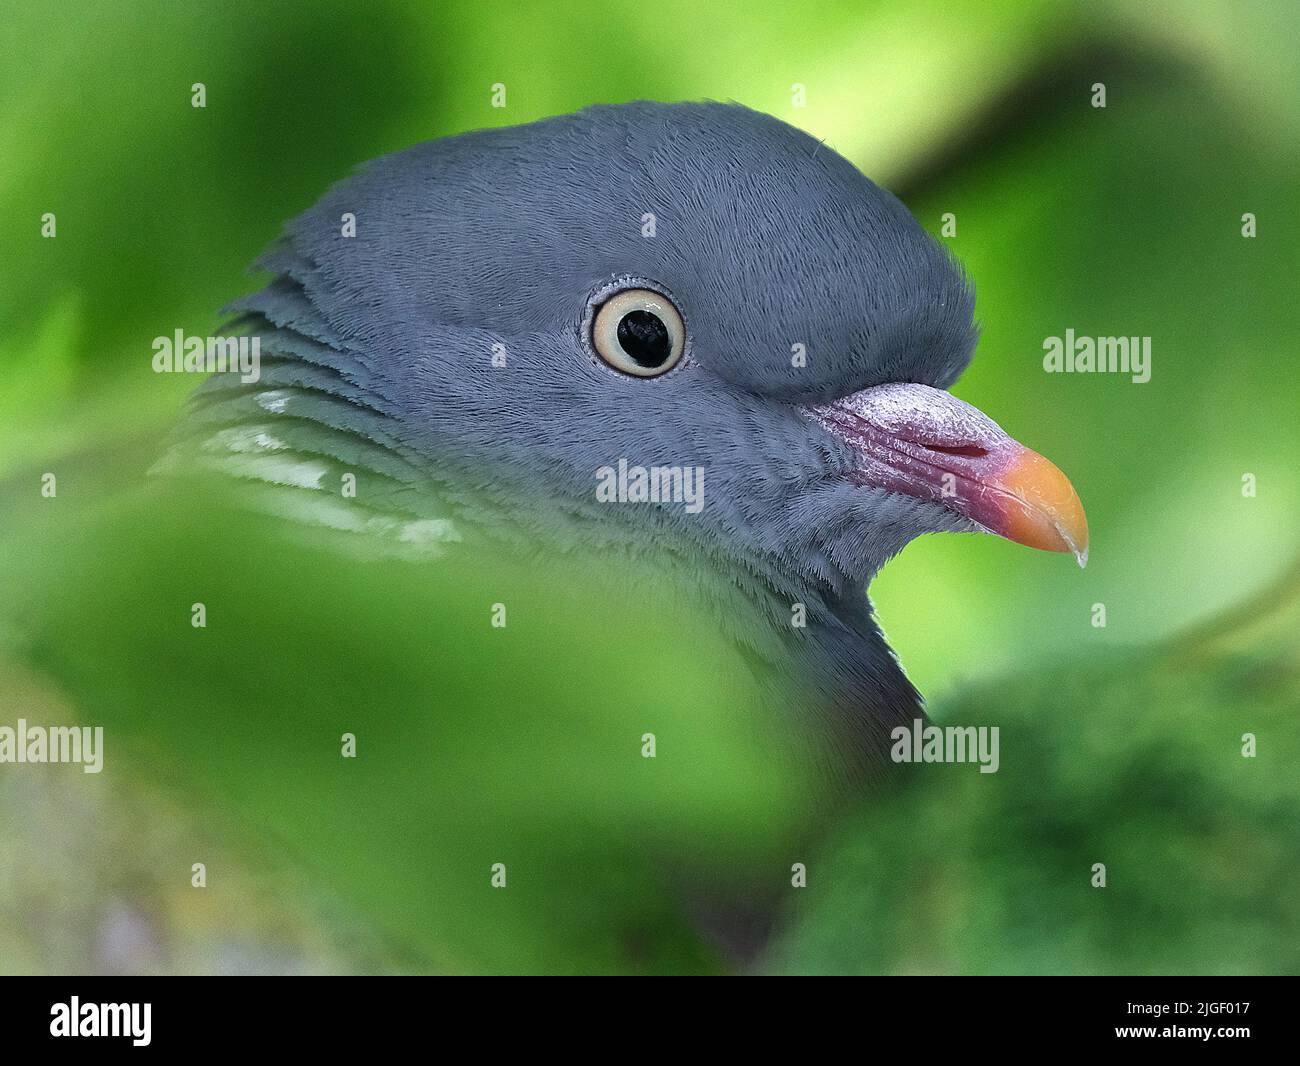 The common wood pigeon or common woodpigeon, also known as simply wood pigeon or woodpigeon, is a large species in the dove and pigeon family. Stock Photo